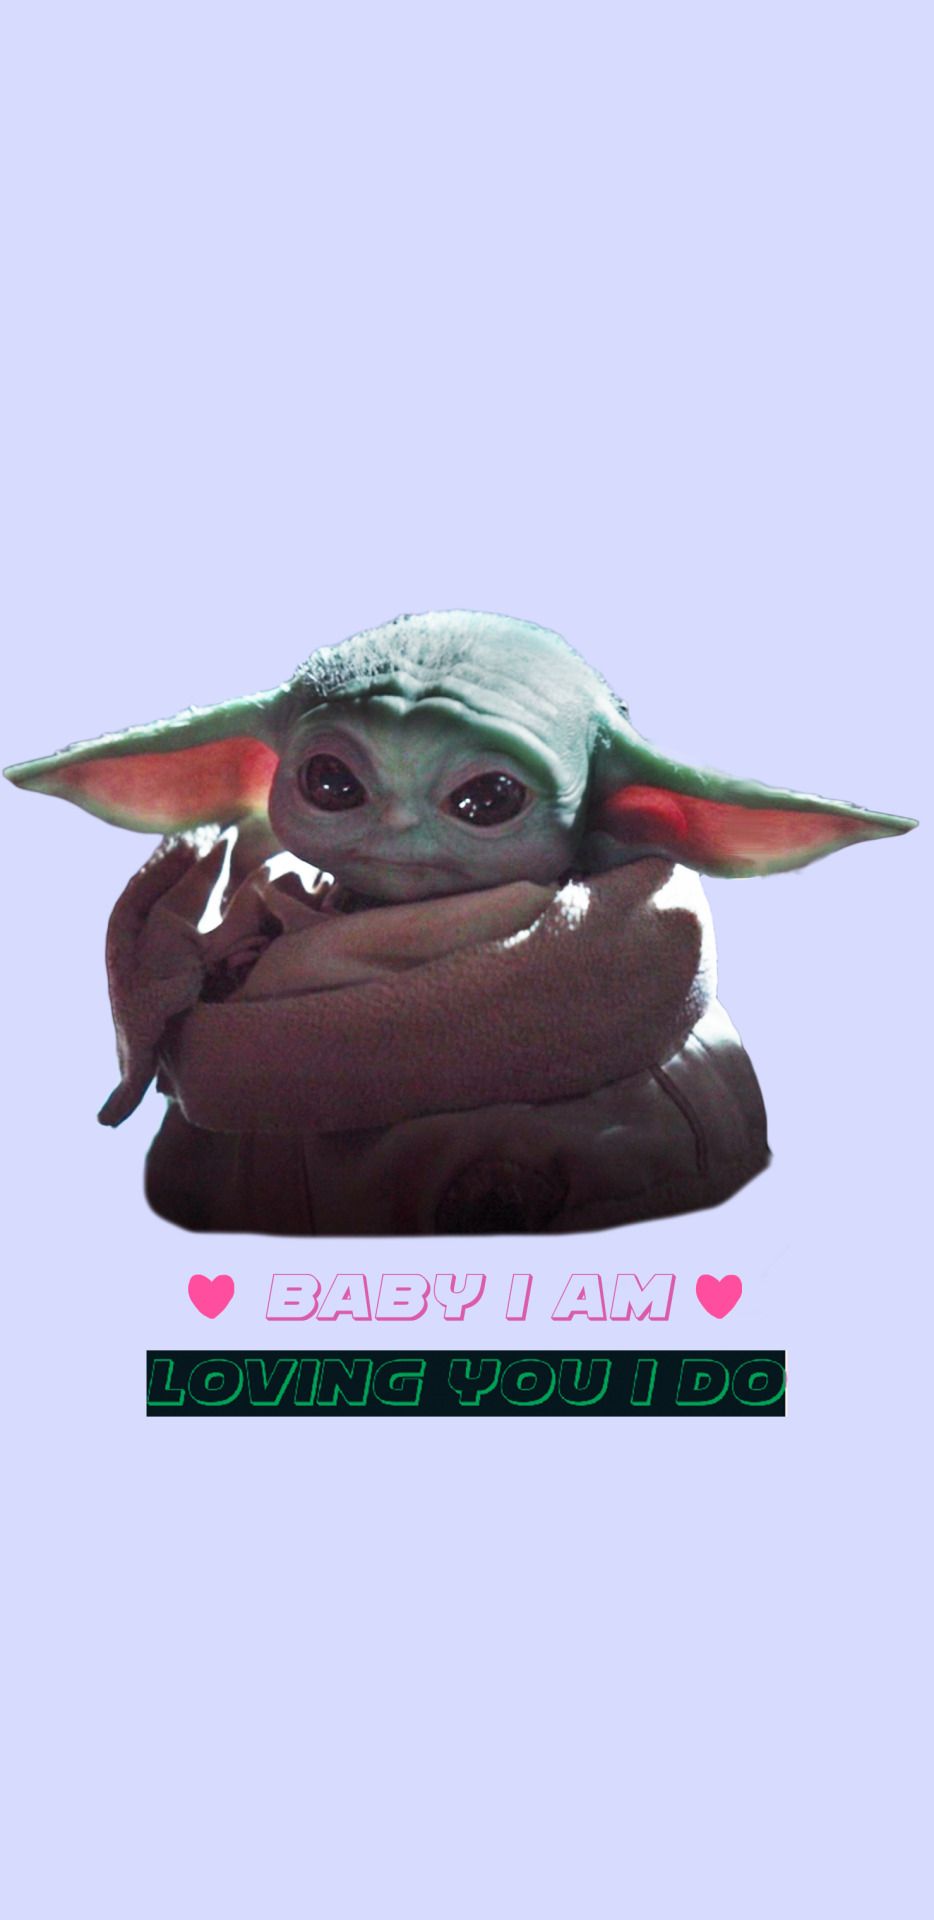 Baby yoda phone background wallpaper with the words 